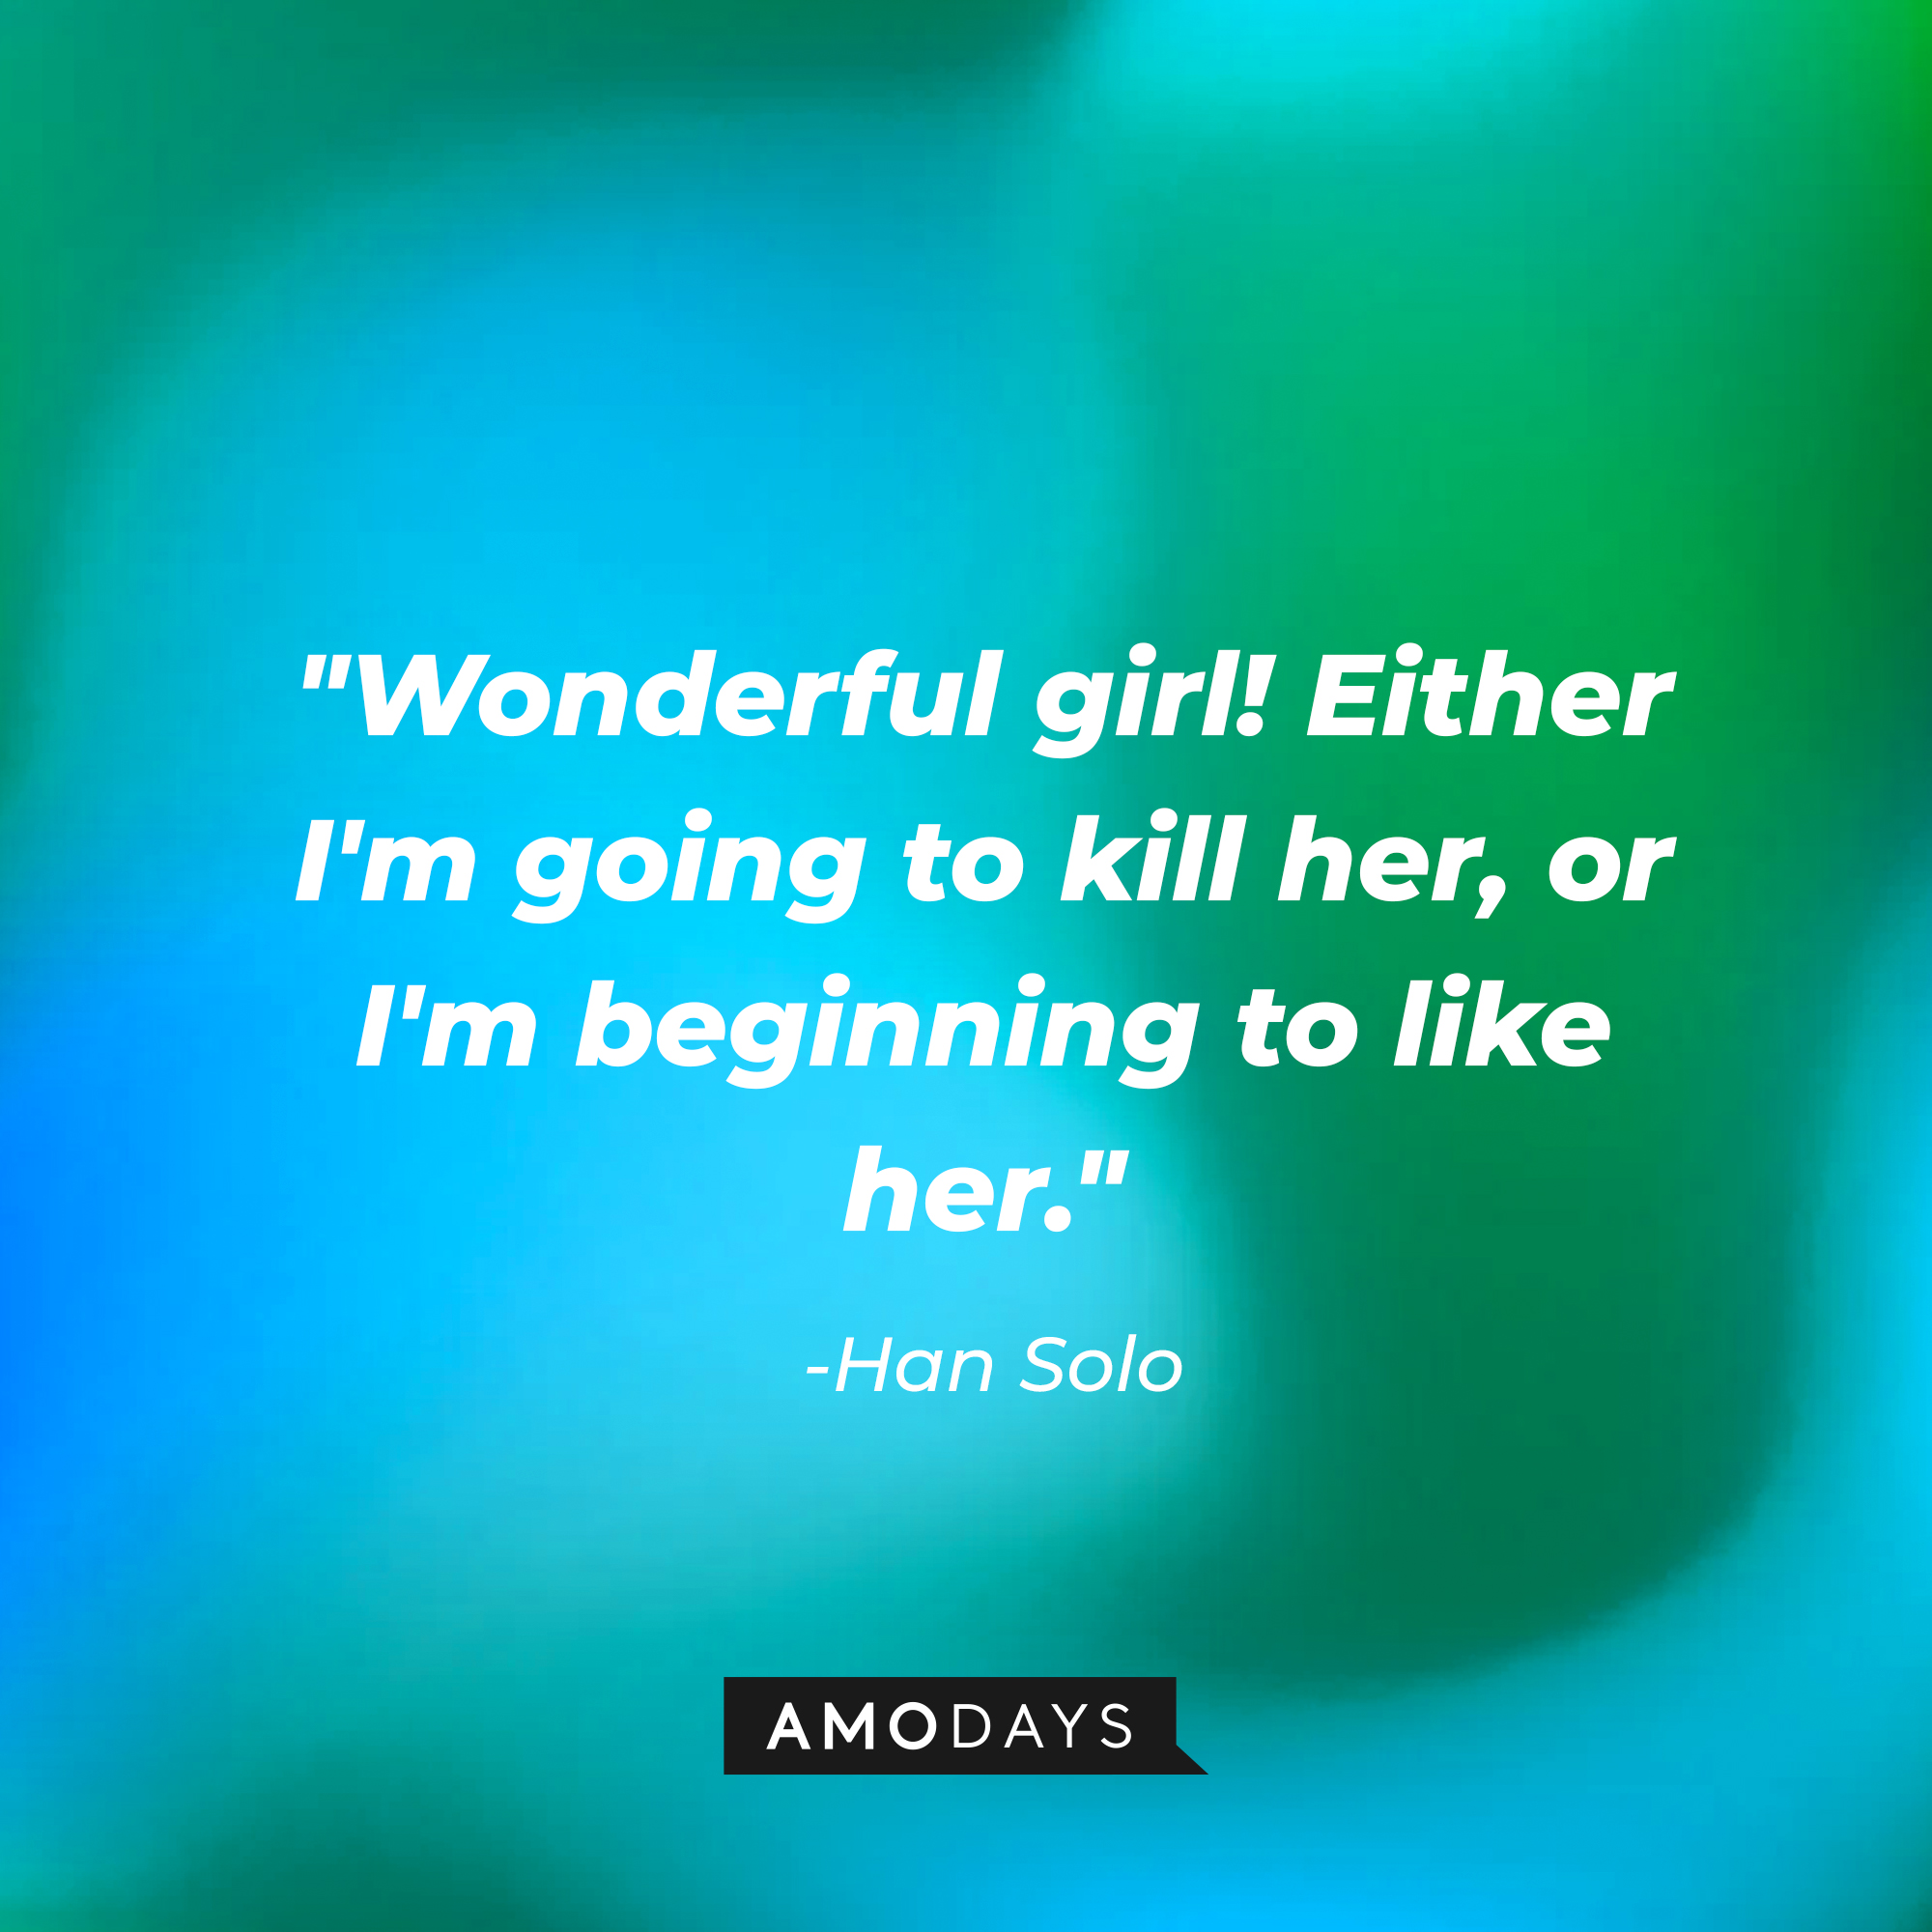 Han Solo’s quote: "Wonderful girl! Either I'm going to kill her, or I'm beginning to like her." | Source: AmoDays